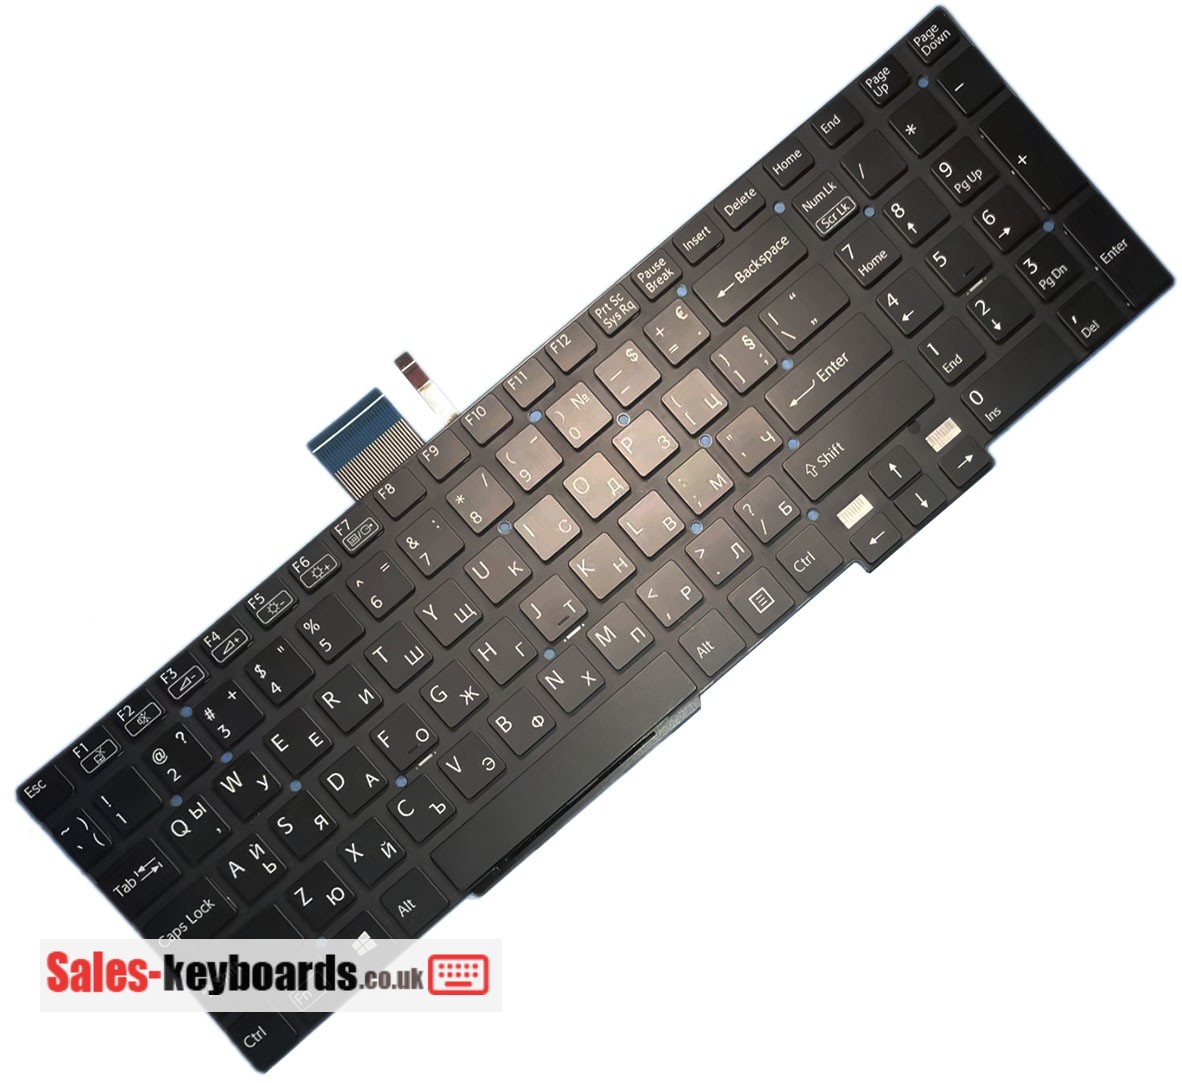 Sony VAIO SVT151A11U Keyboard replacement